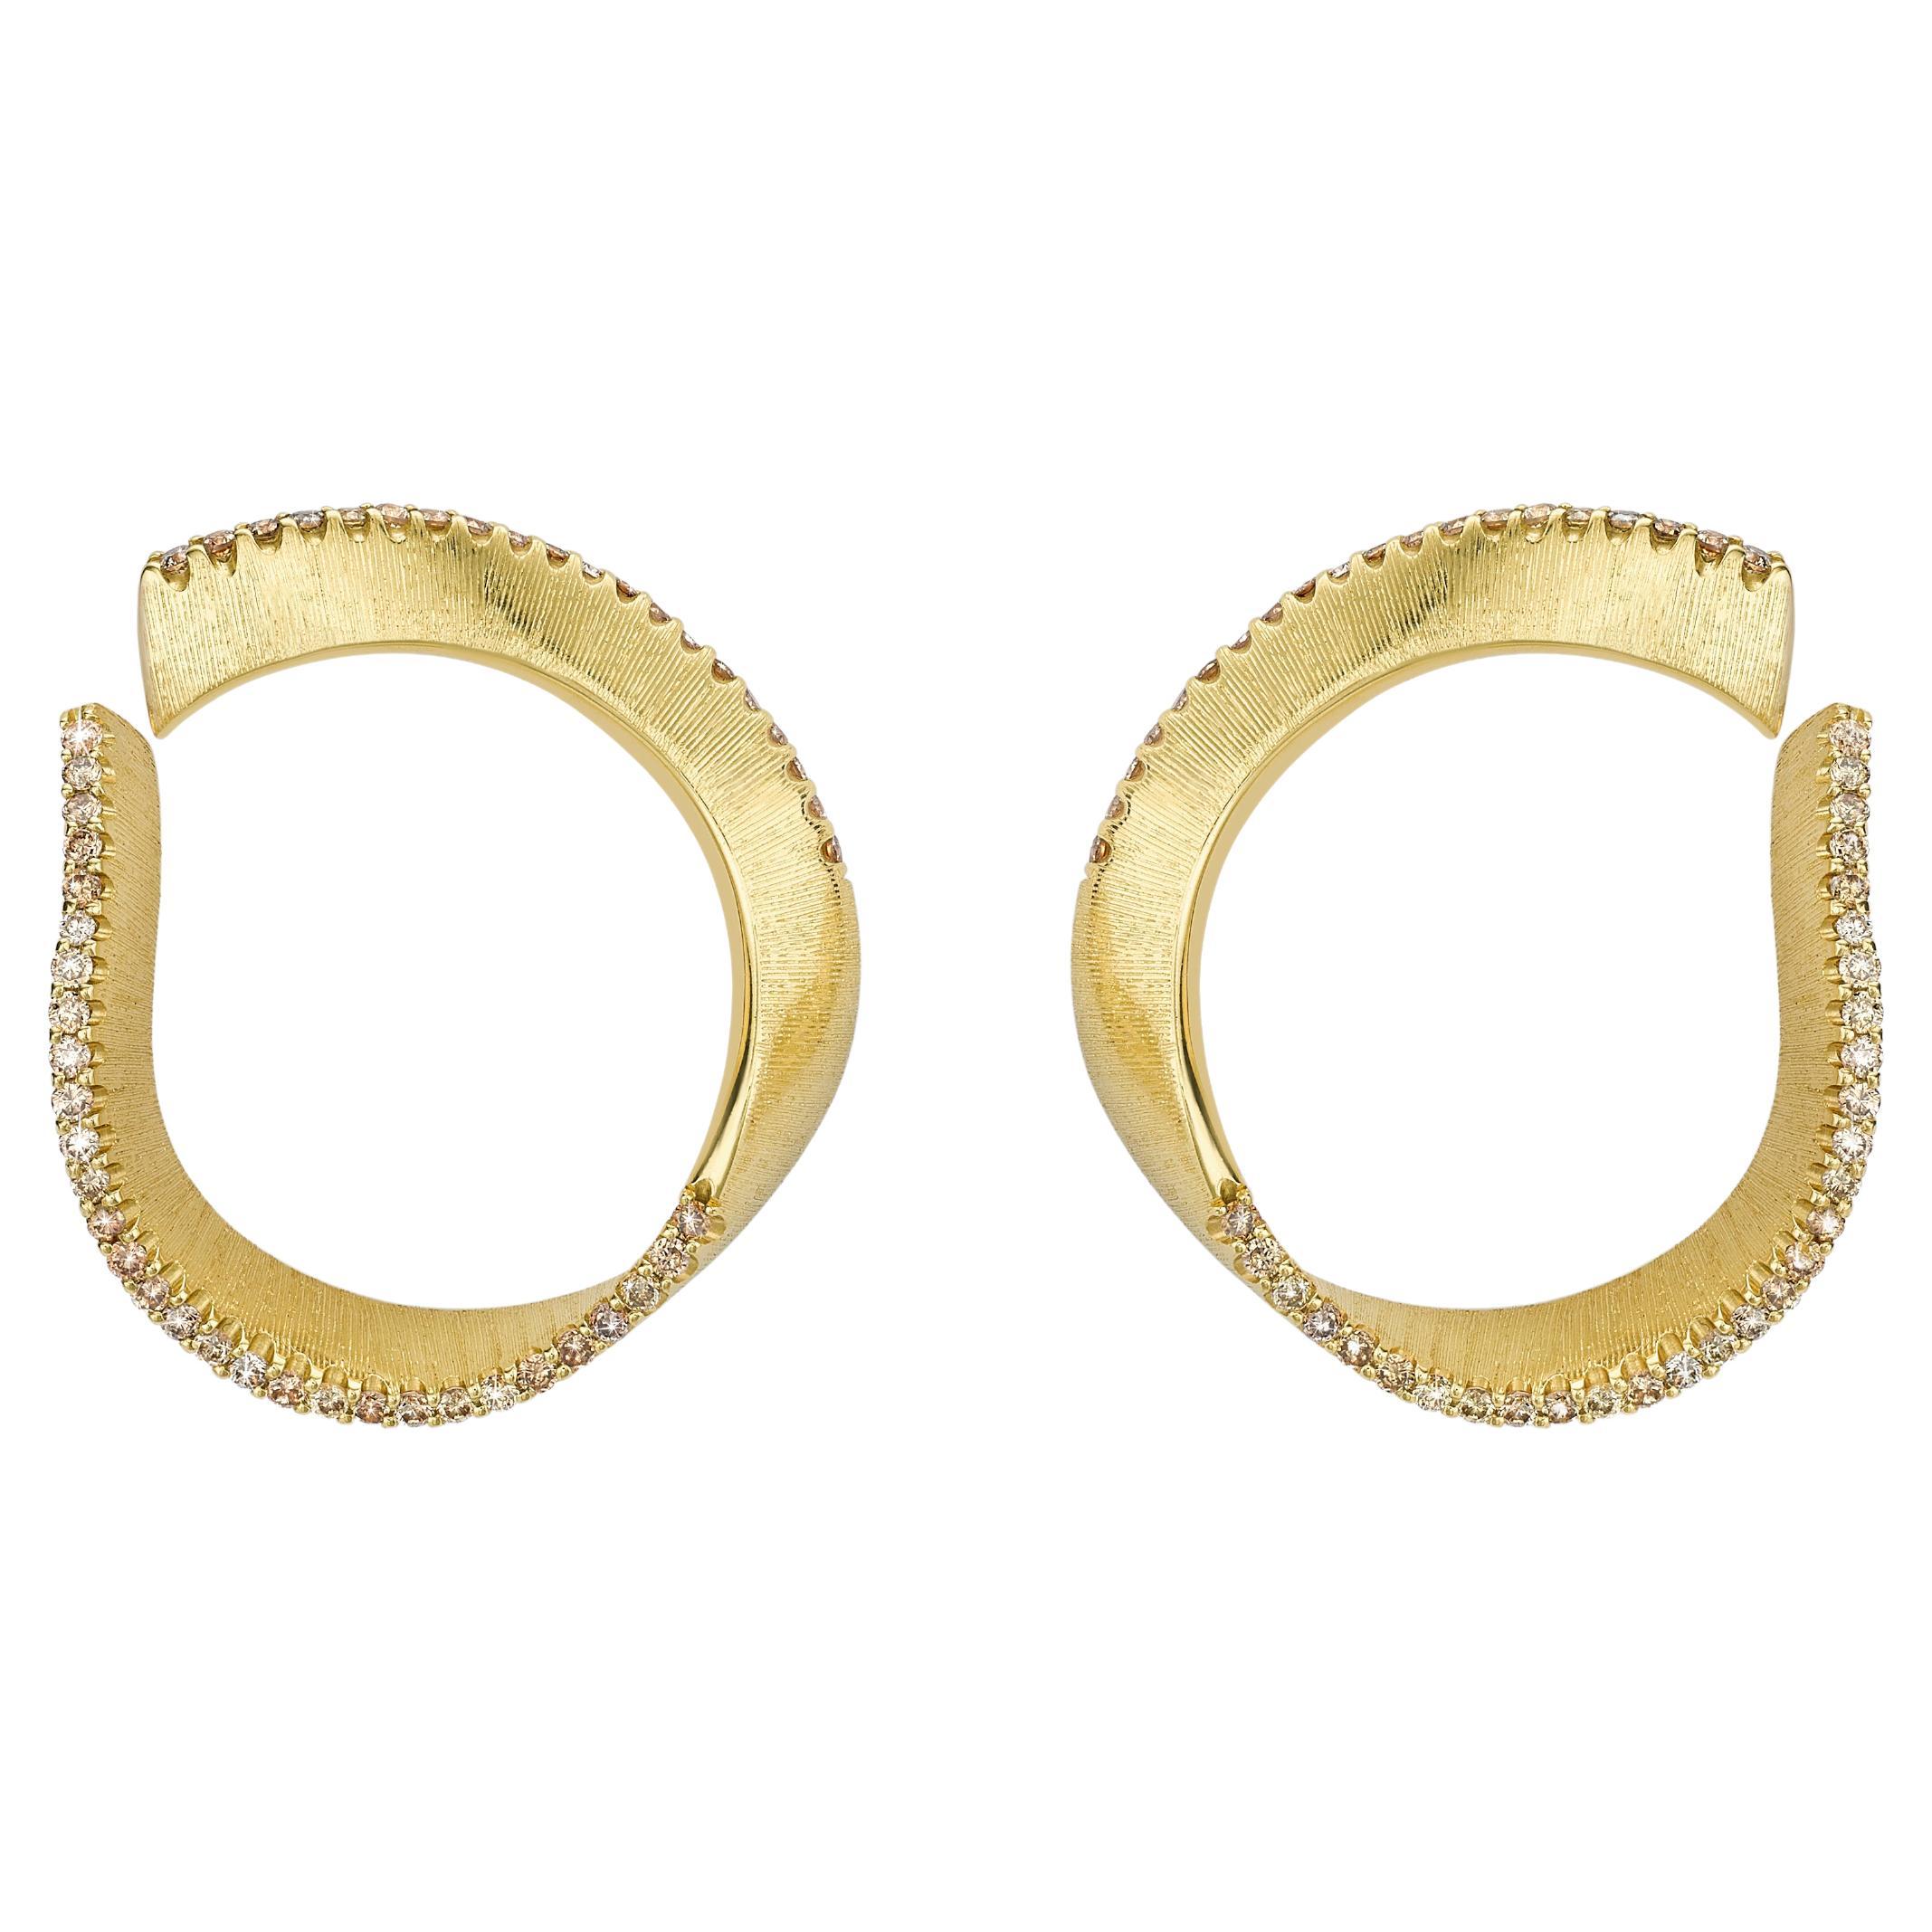 TWIST HOOP EARRINGS  Yellow gold with a warm-tone diamond edge by Liv Luttrell For Sale